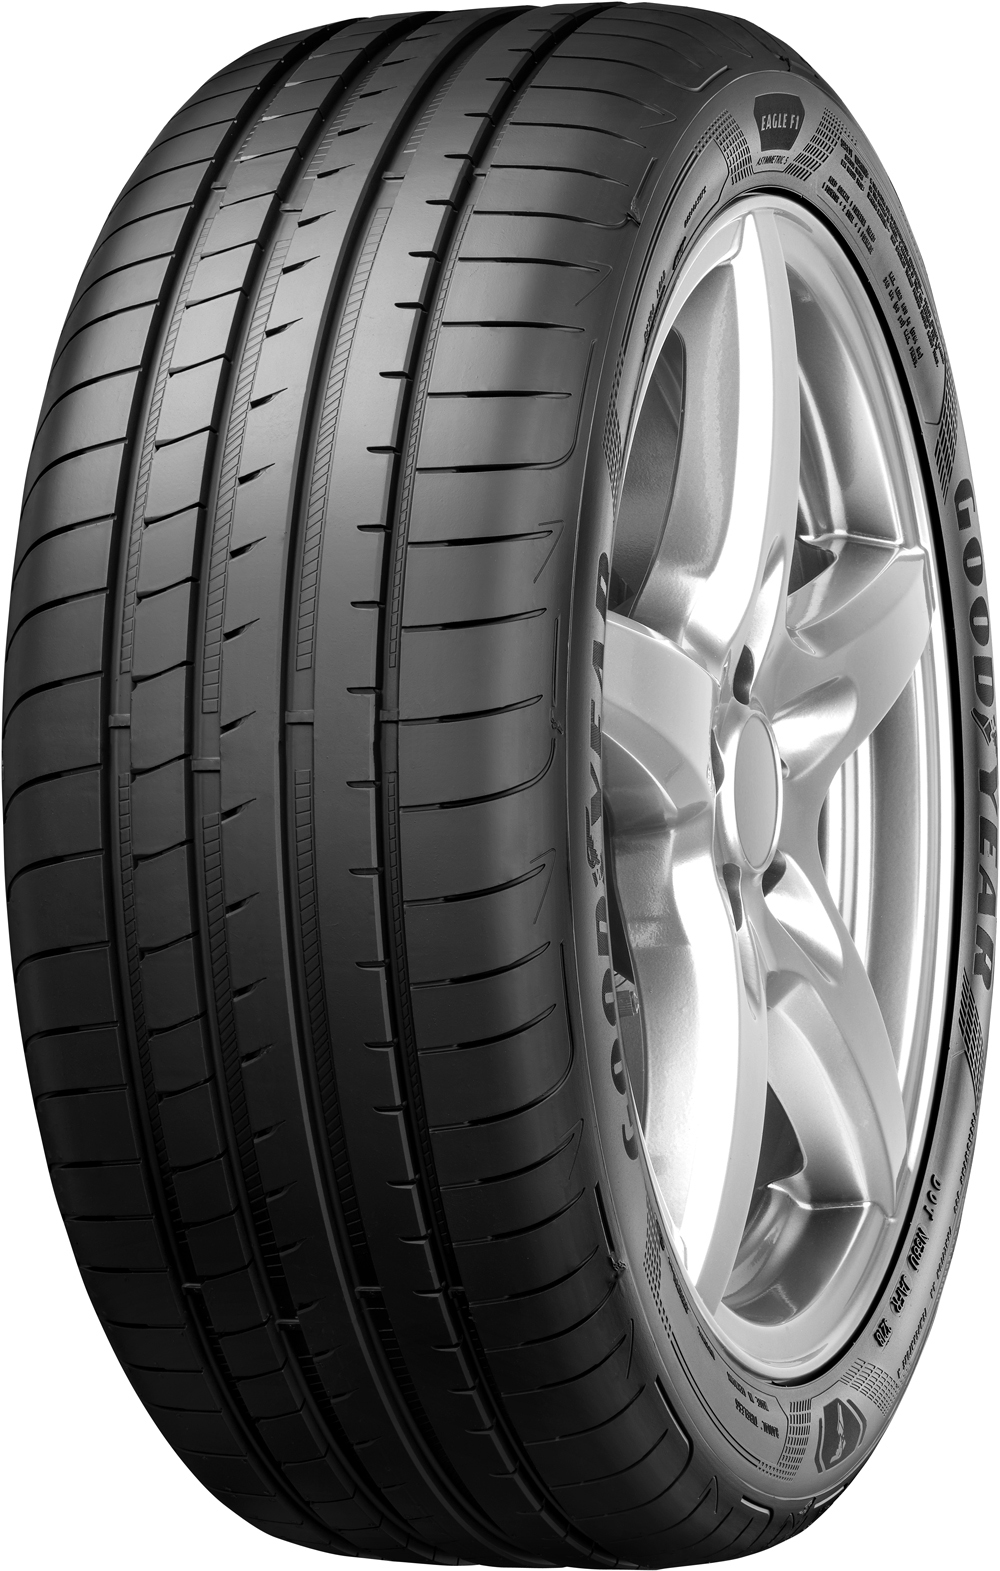 Anvelope auto GOODYEAR EAGF1AS5MO XL MERCEDES FP 255/35 R19 96Y